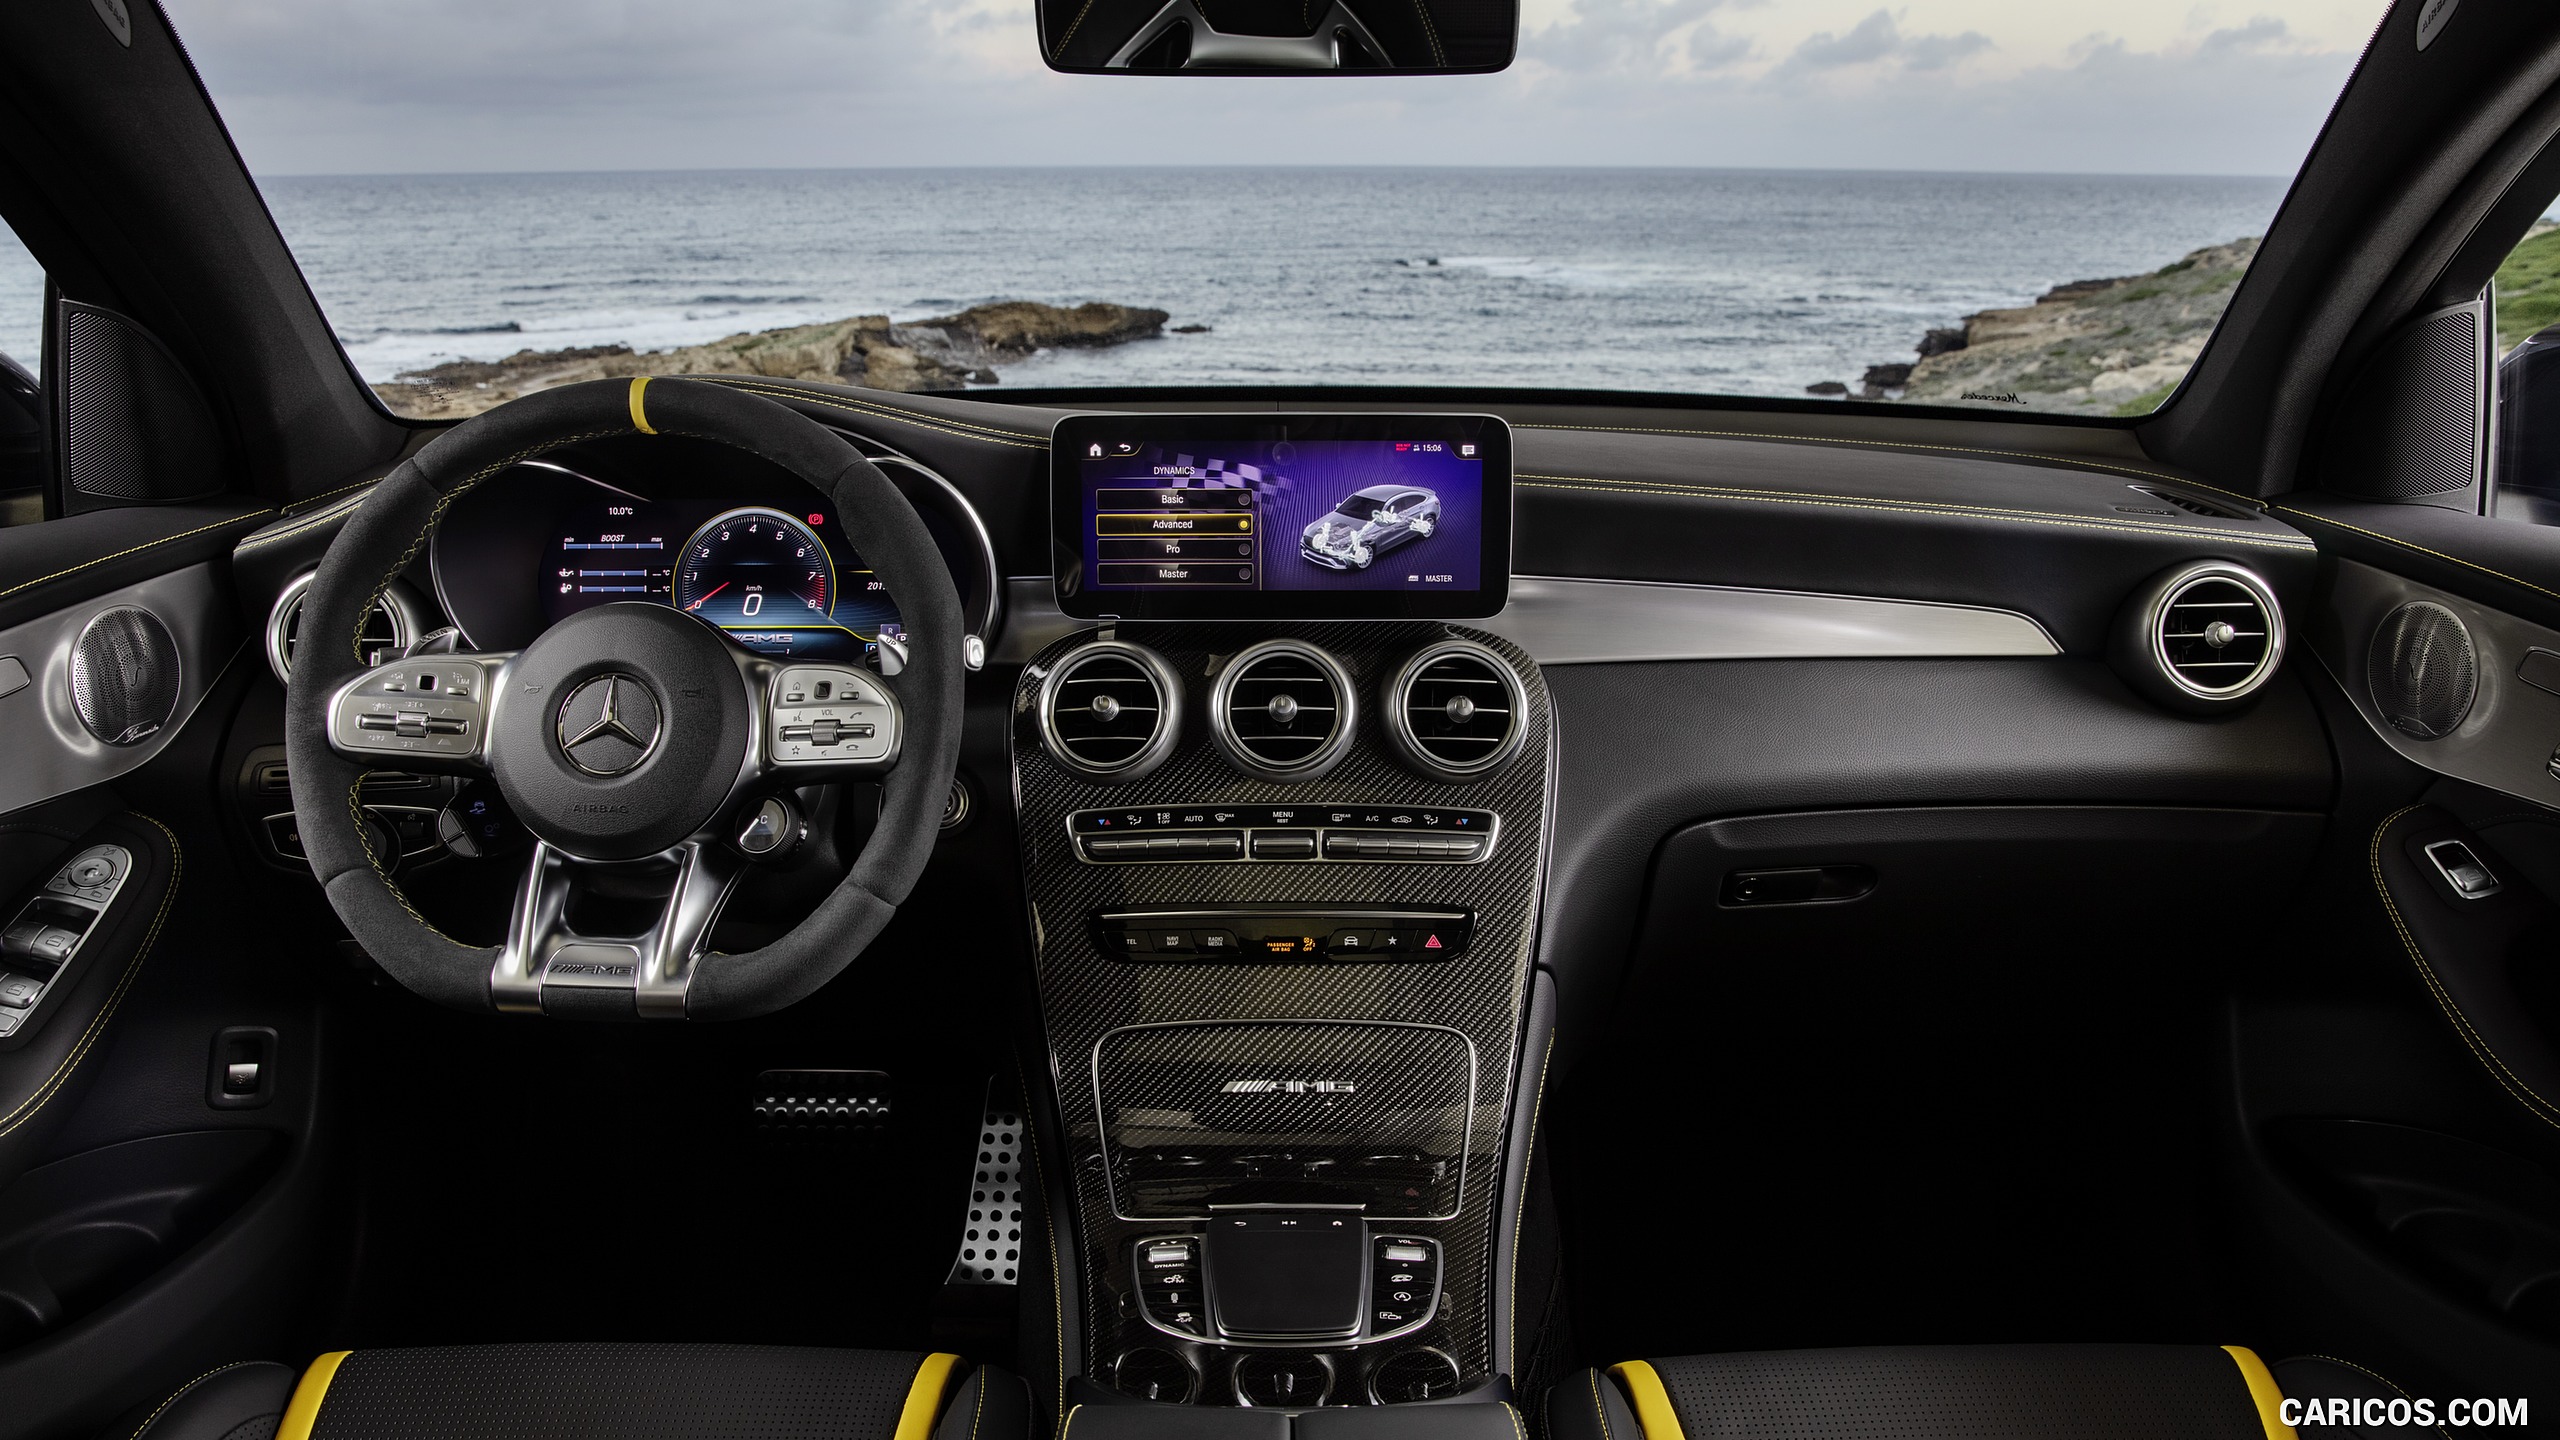 2020 Mercedes-AMG GLC 63 S 4MATIC+ Coupe - Interior, Cockpit, #19 of 102